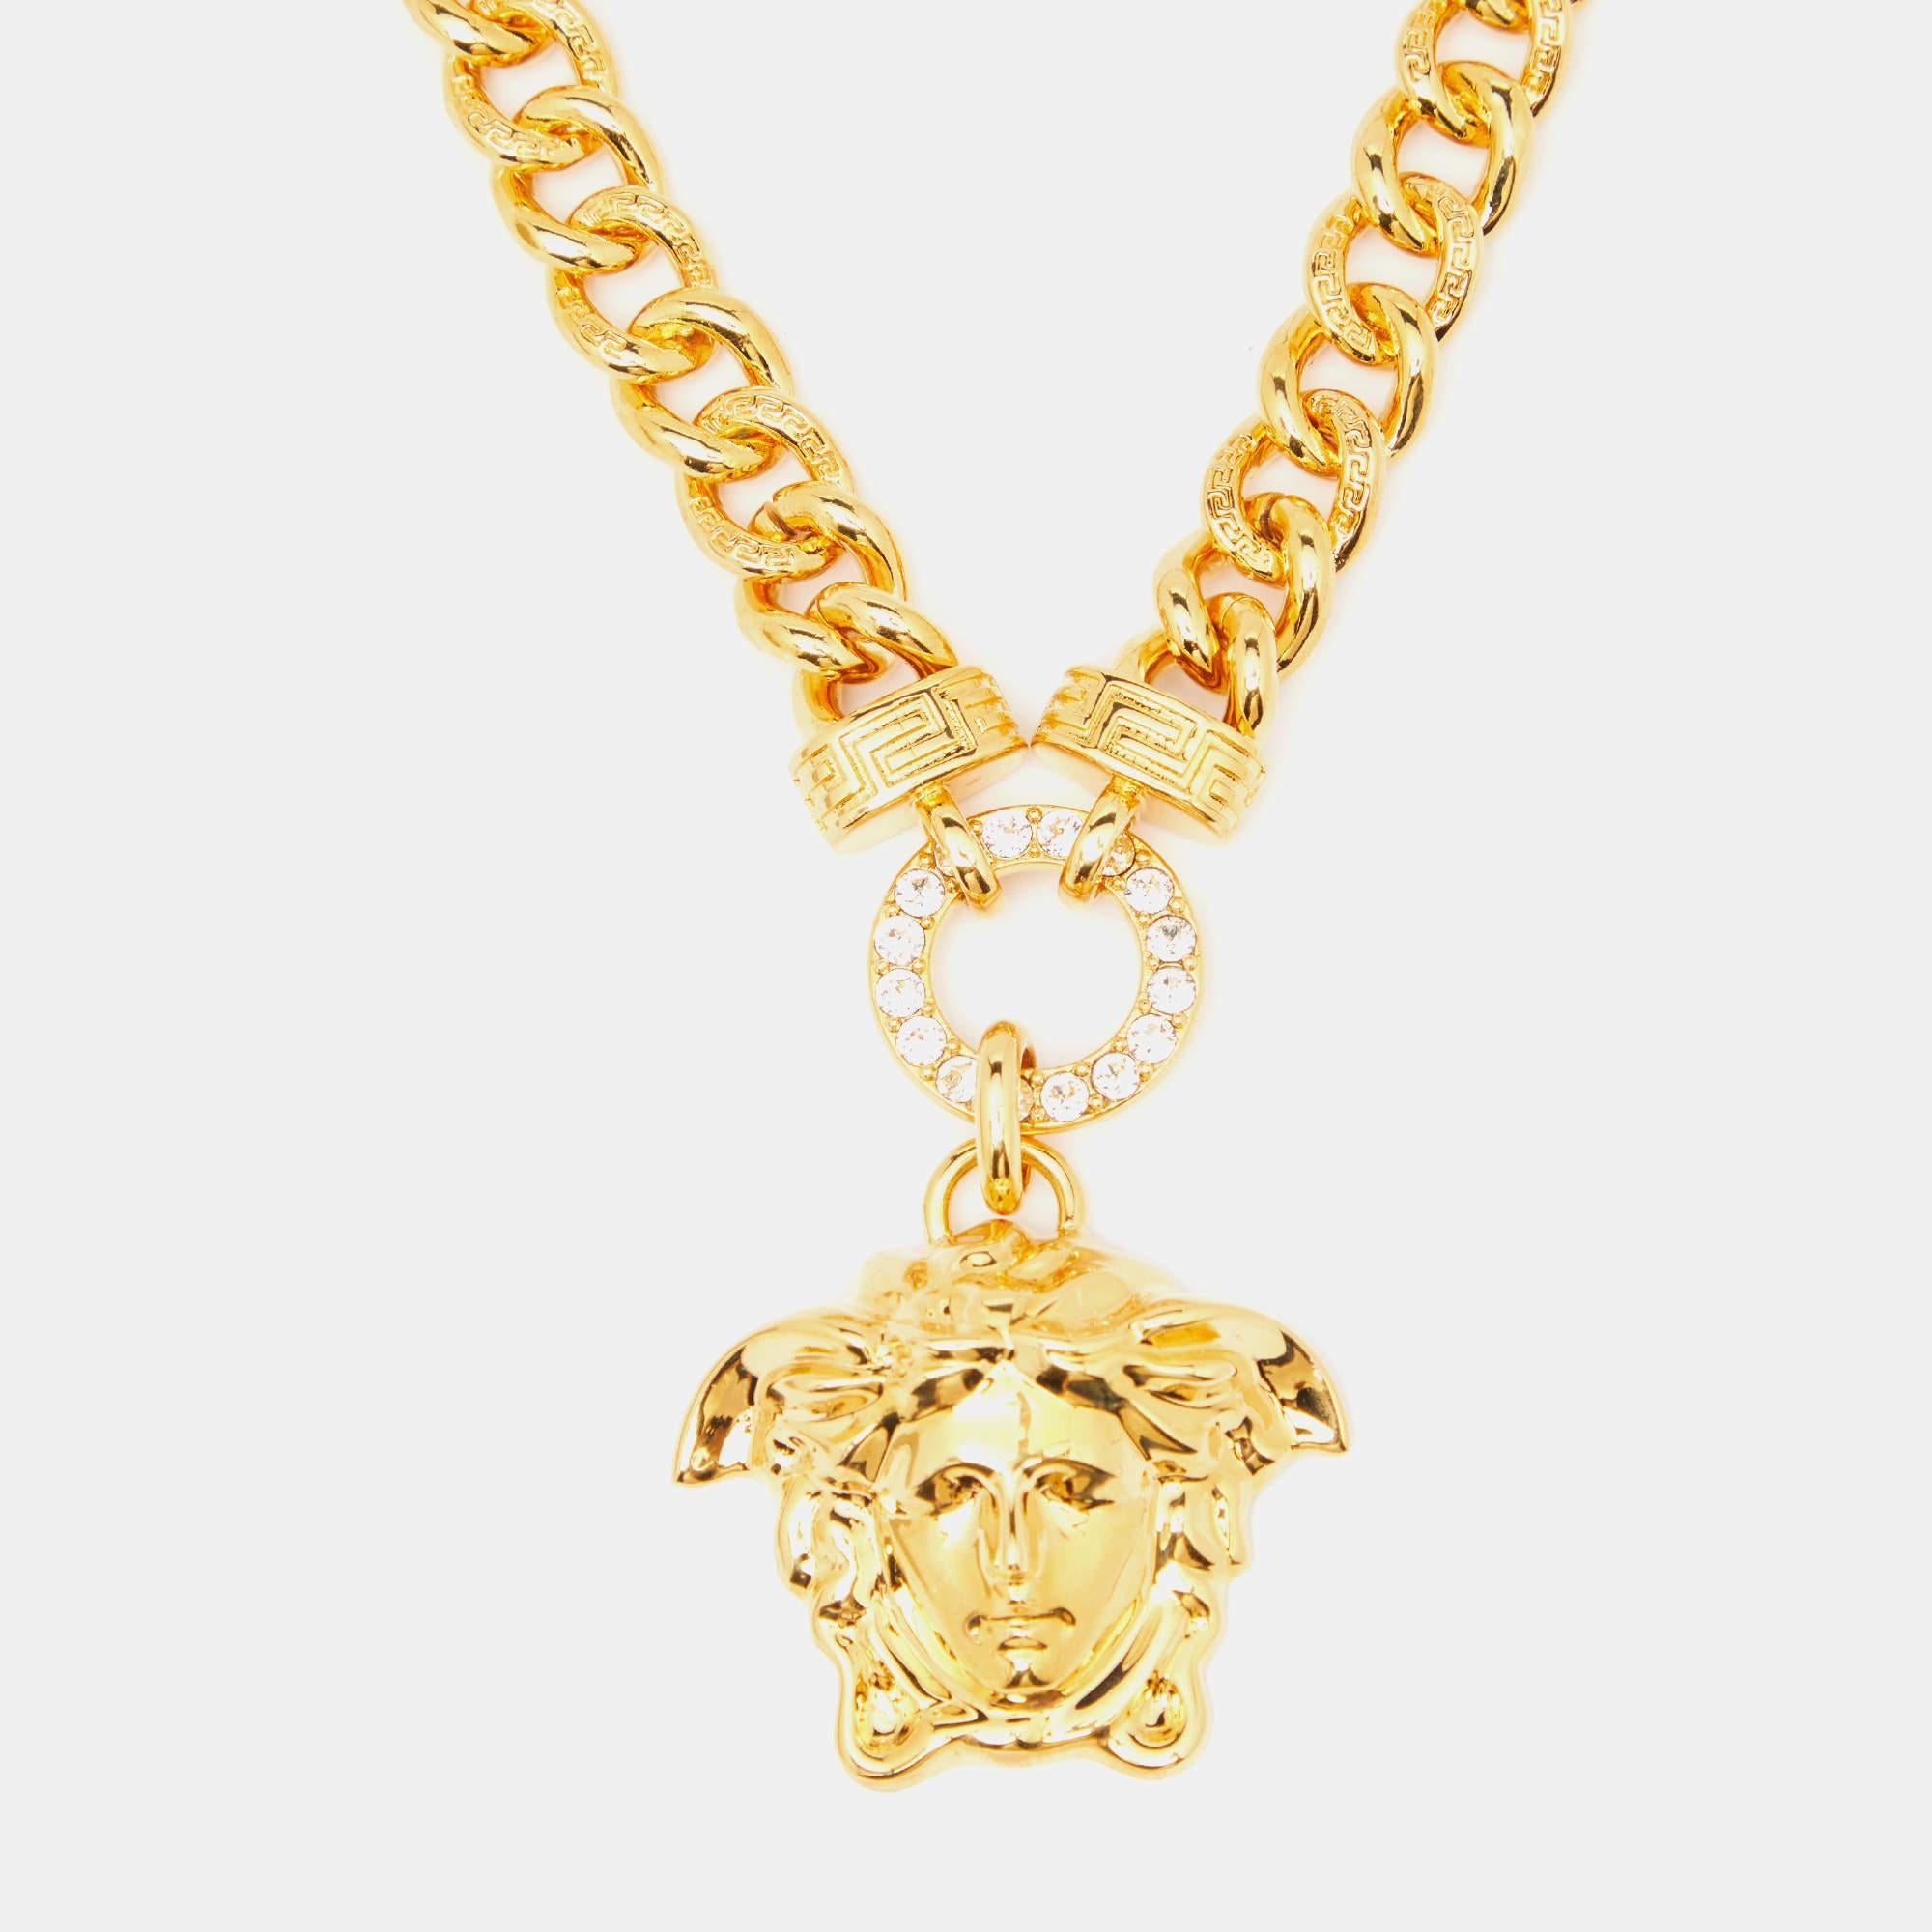 Adorn yourself with the opulent allure of the Versace necklace. Crafted with meticulous attention to detail, this exquisite piece features a striking Medusa emblem encrusted with sparkling crystals, set against a lustrous gold-tone backdrop. A